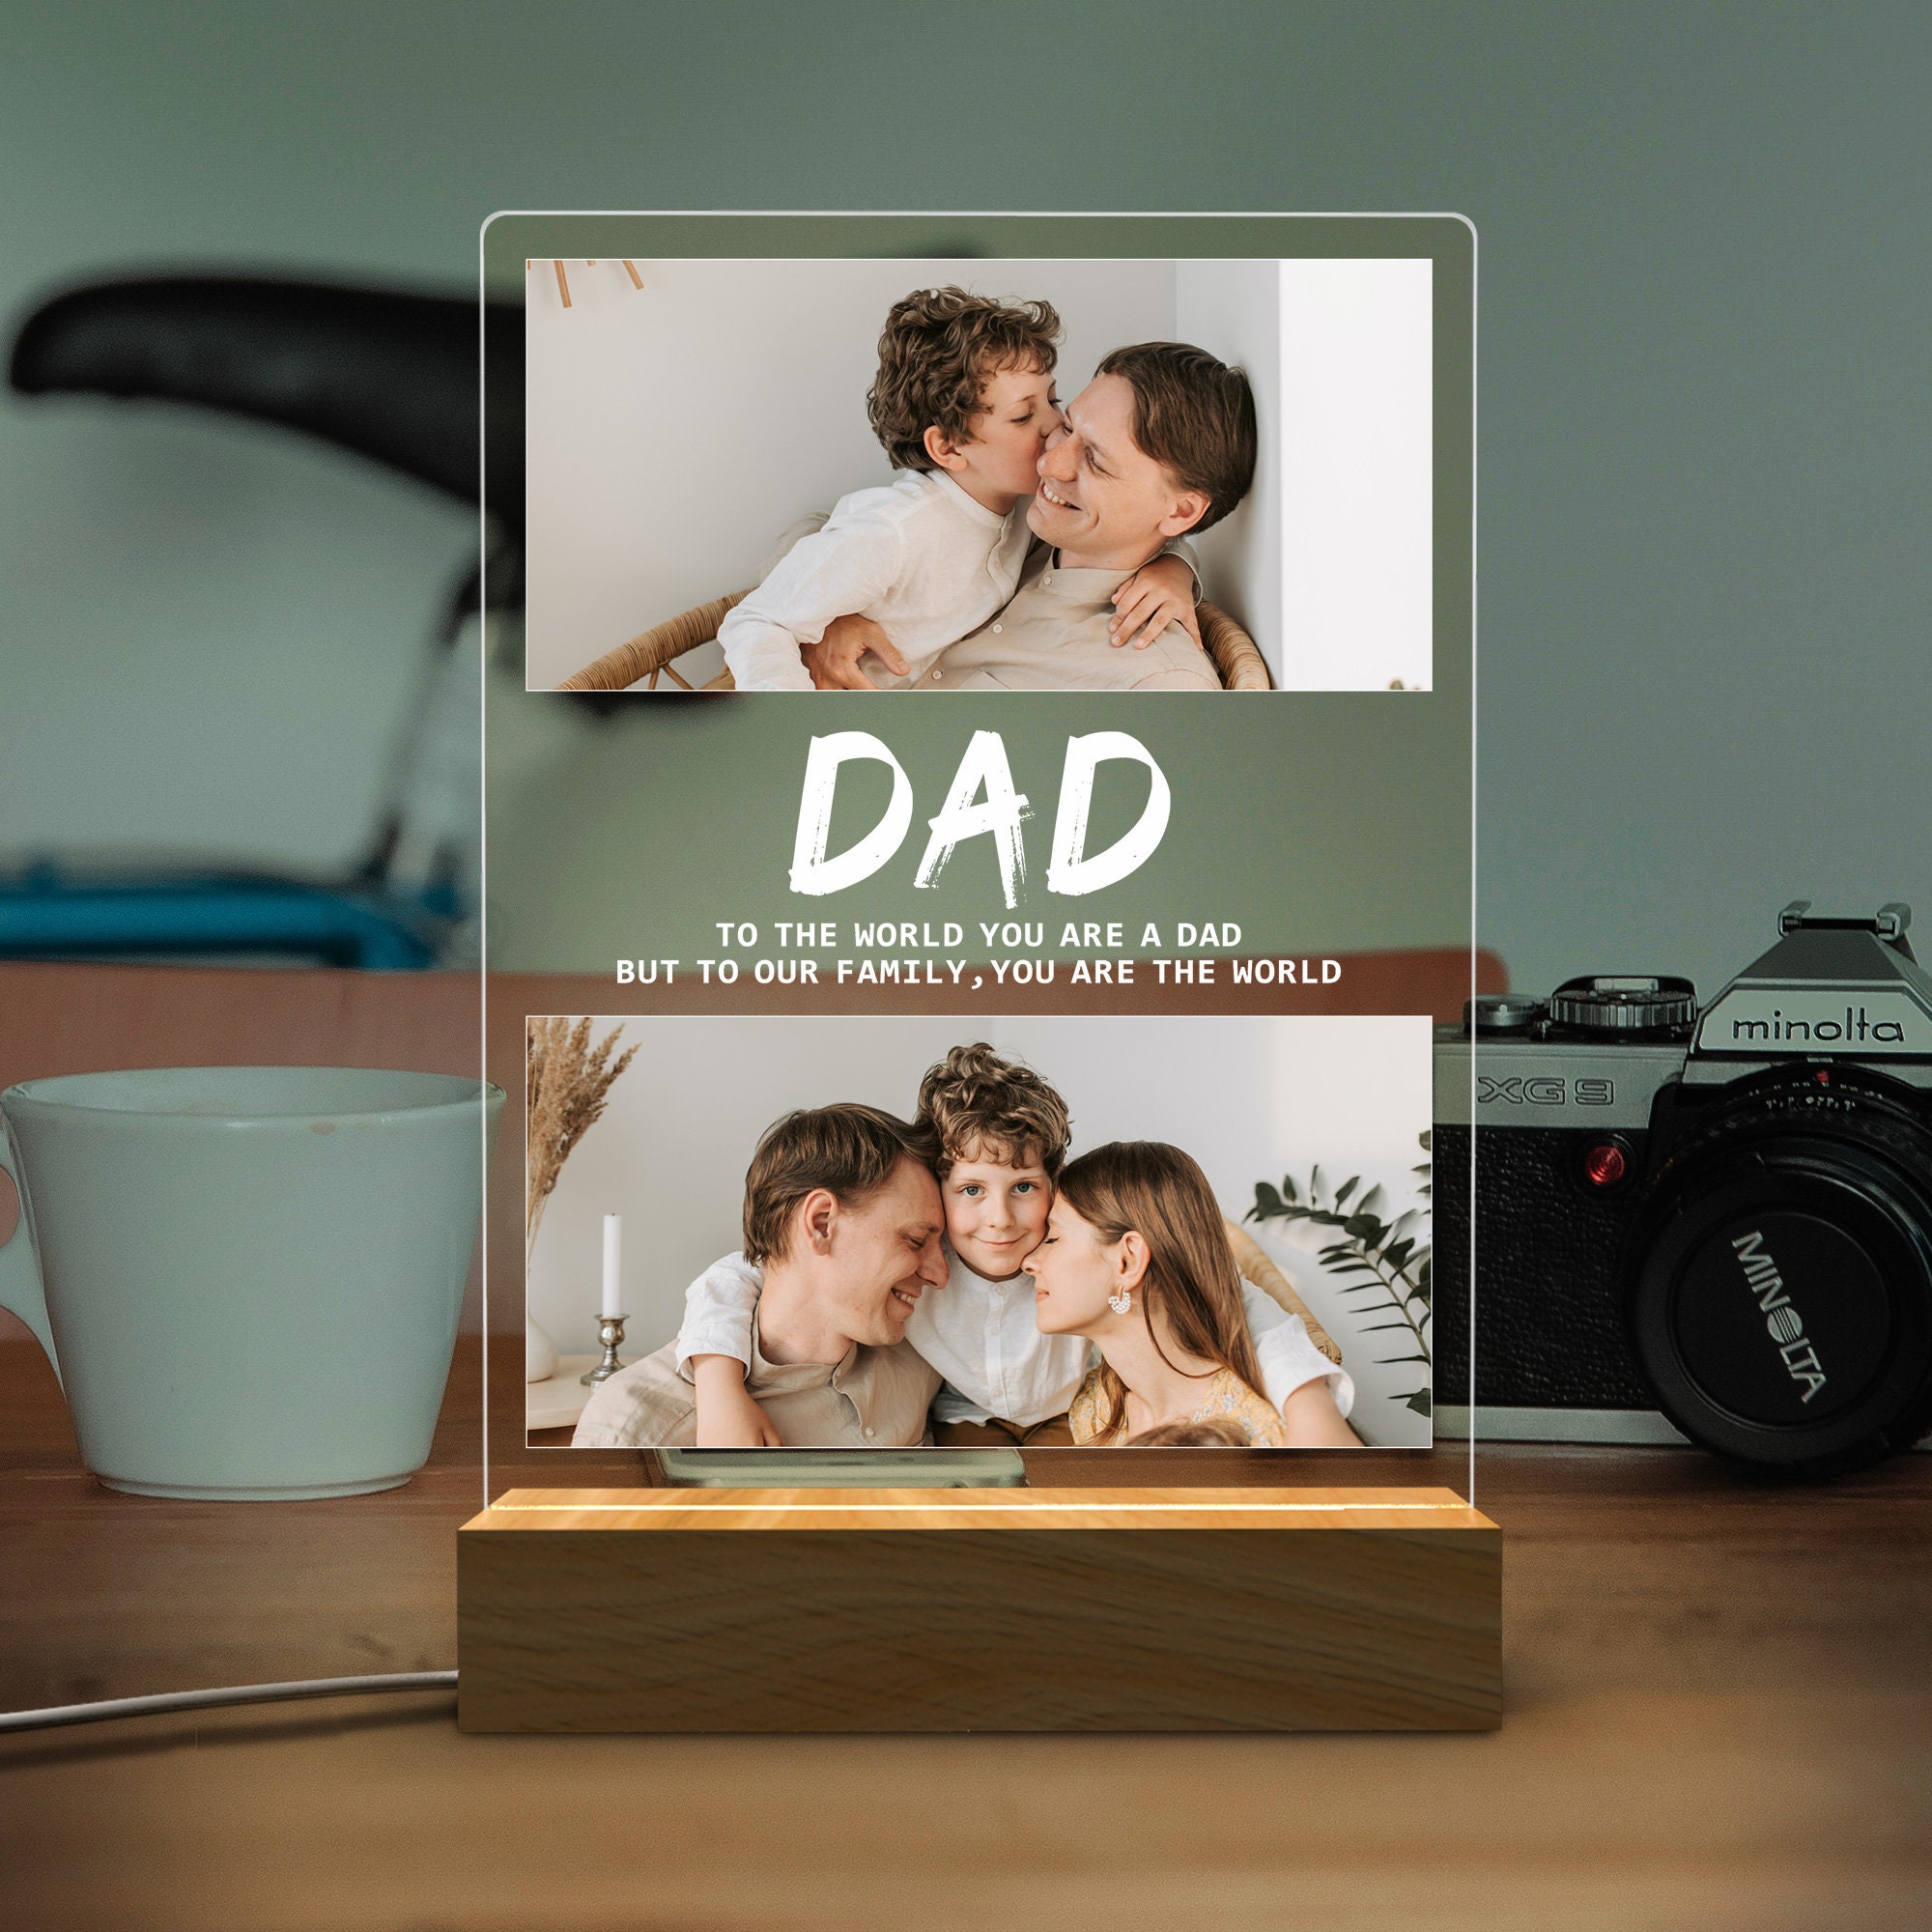 Night Light - Personalized Photo We Love You Night Light, Love Dad Night  Light, Father's Kids Night Light, Best Dad Night Light, Gift For Papa Daddy